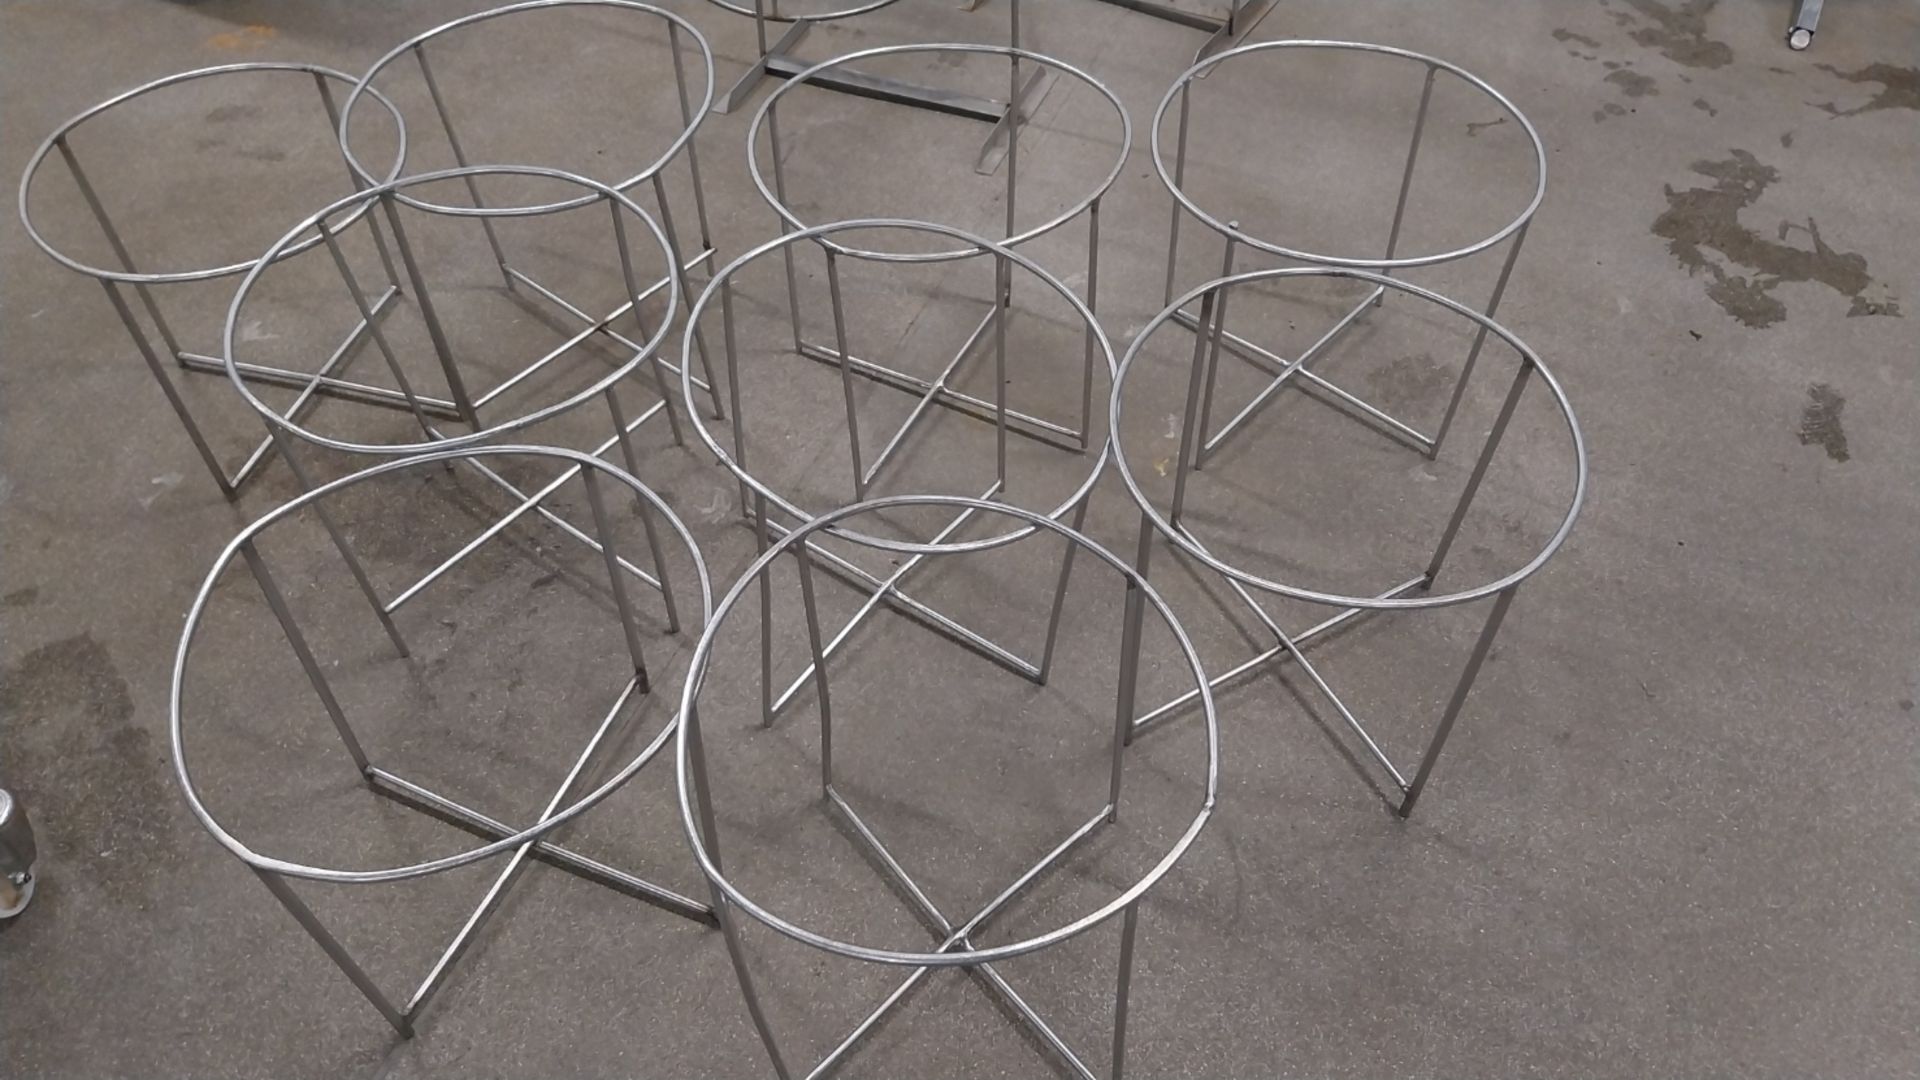 10 X STAINLESS STEEL BASKET STANDS. - Image 3 of 3